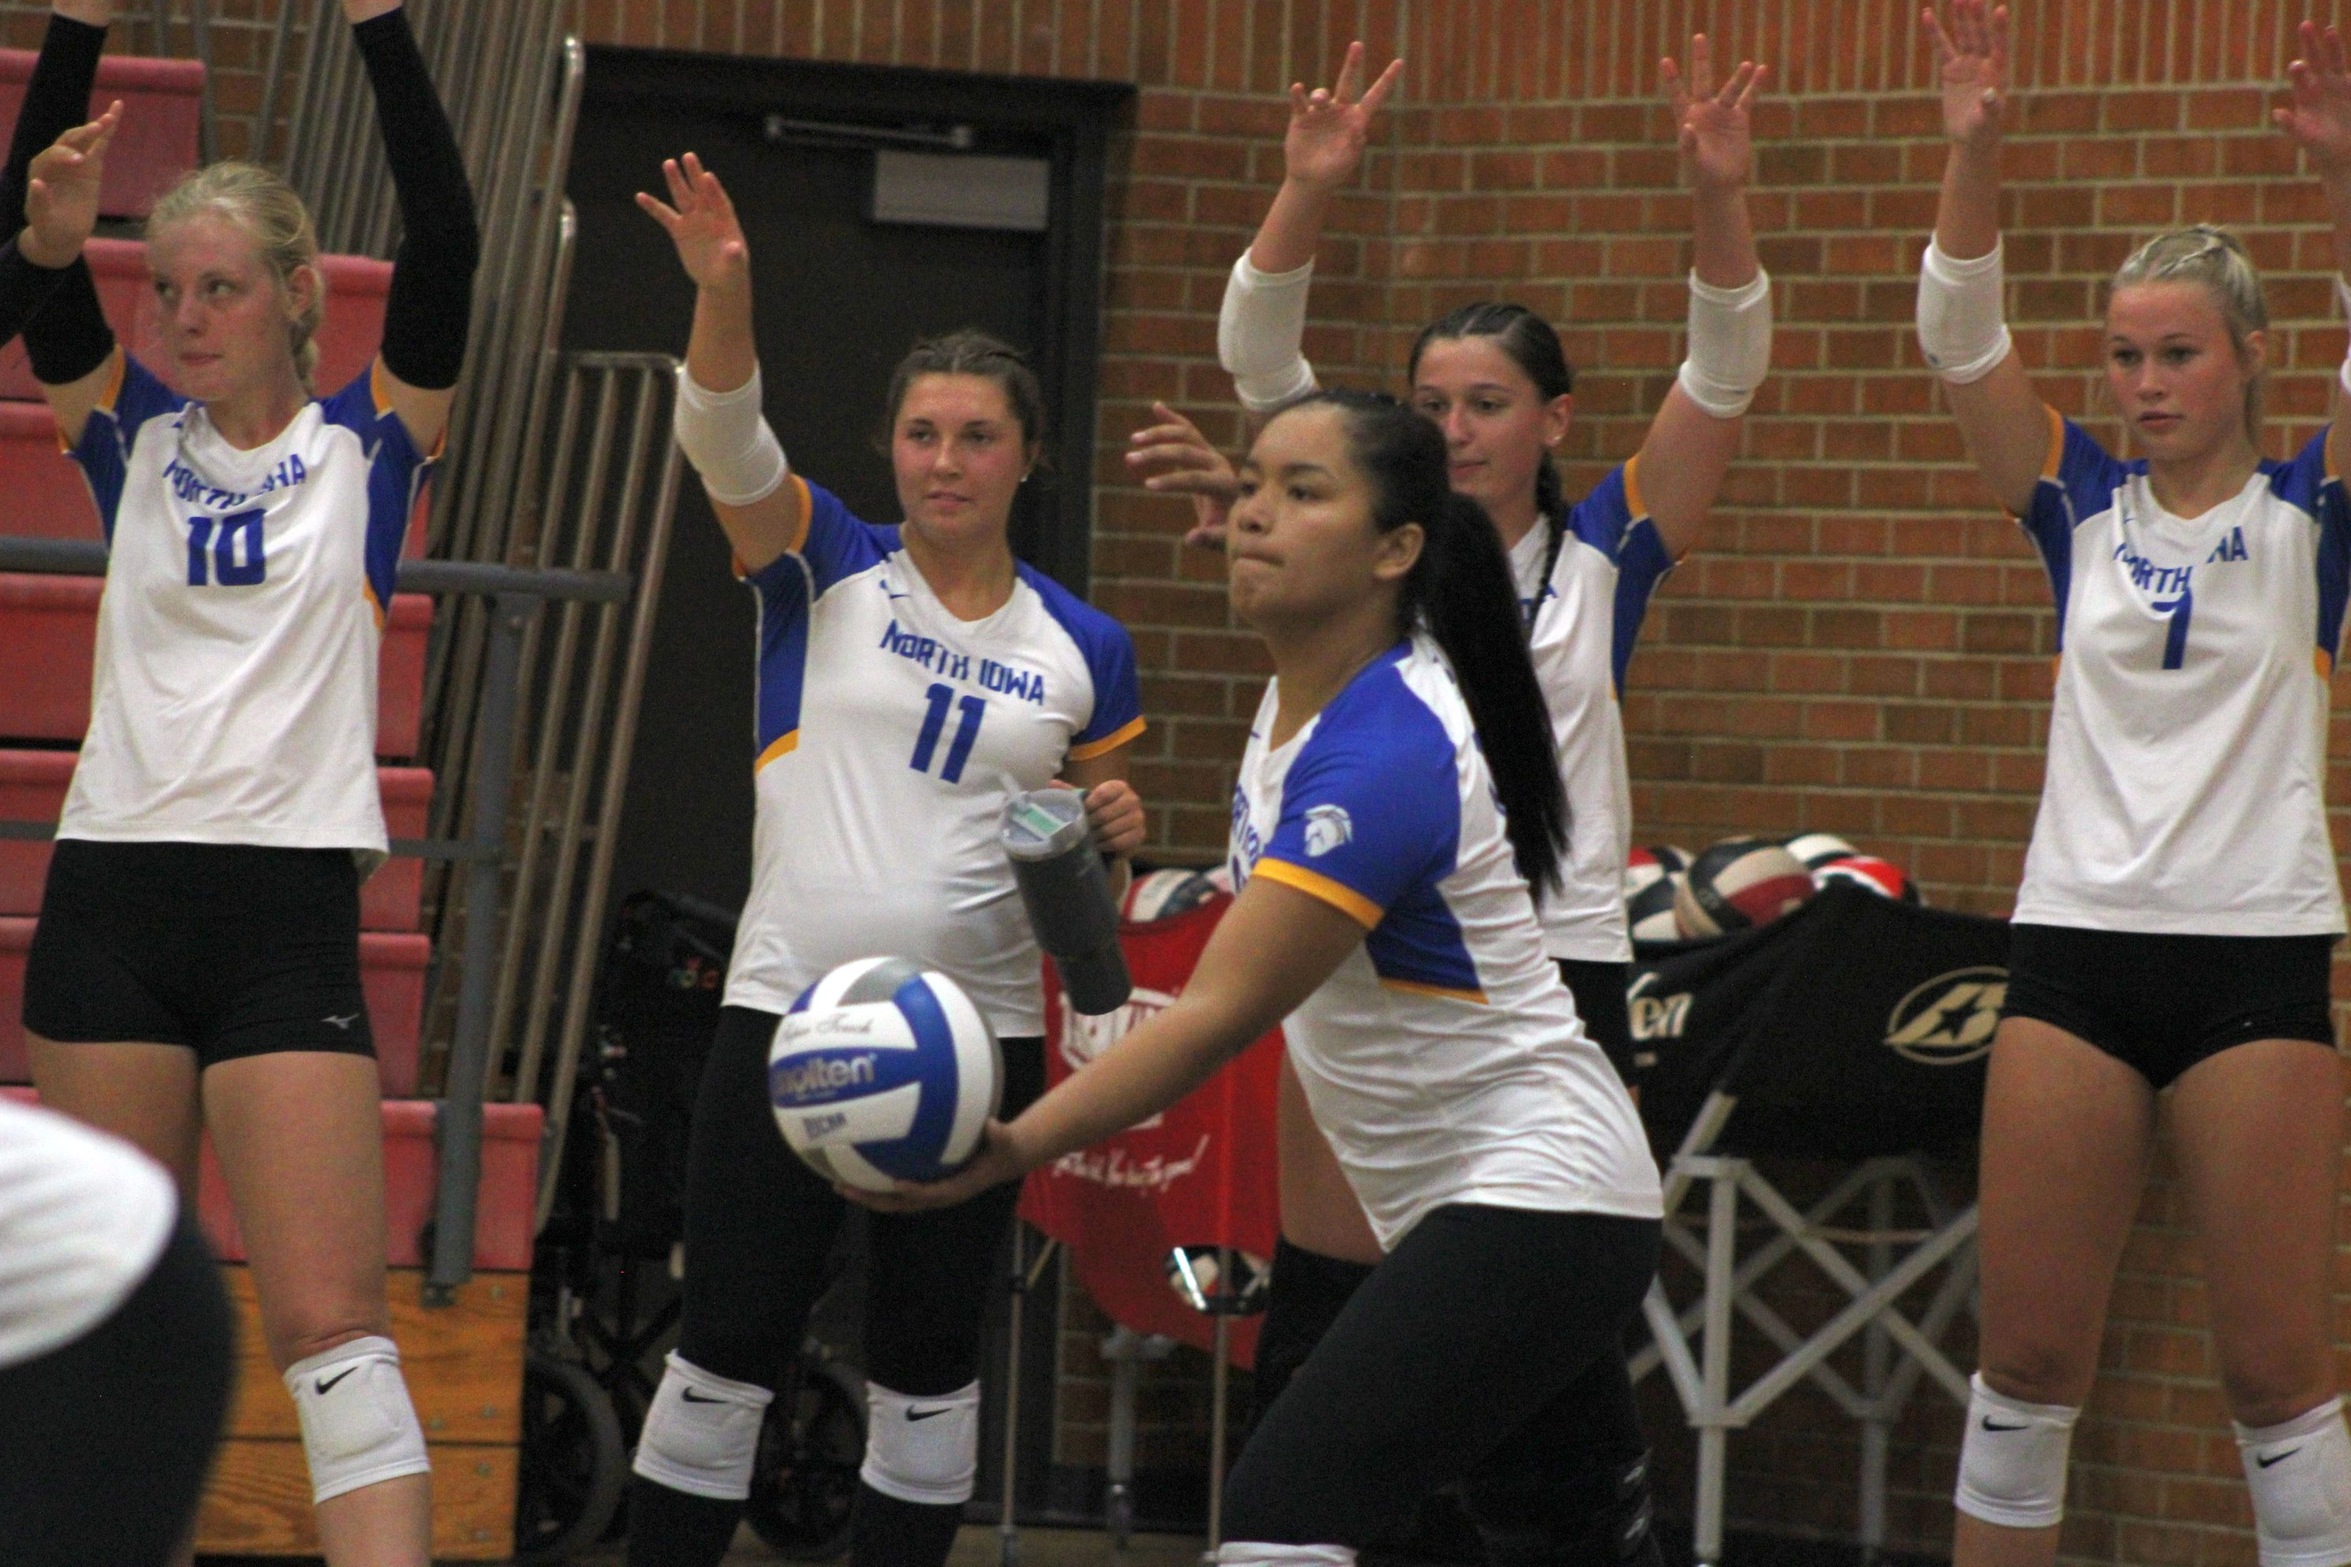 NIACC's Iwalani Beltran serves during Wednesday's match against DMACC in the Mason City High gym.